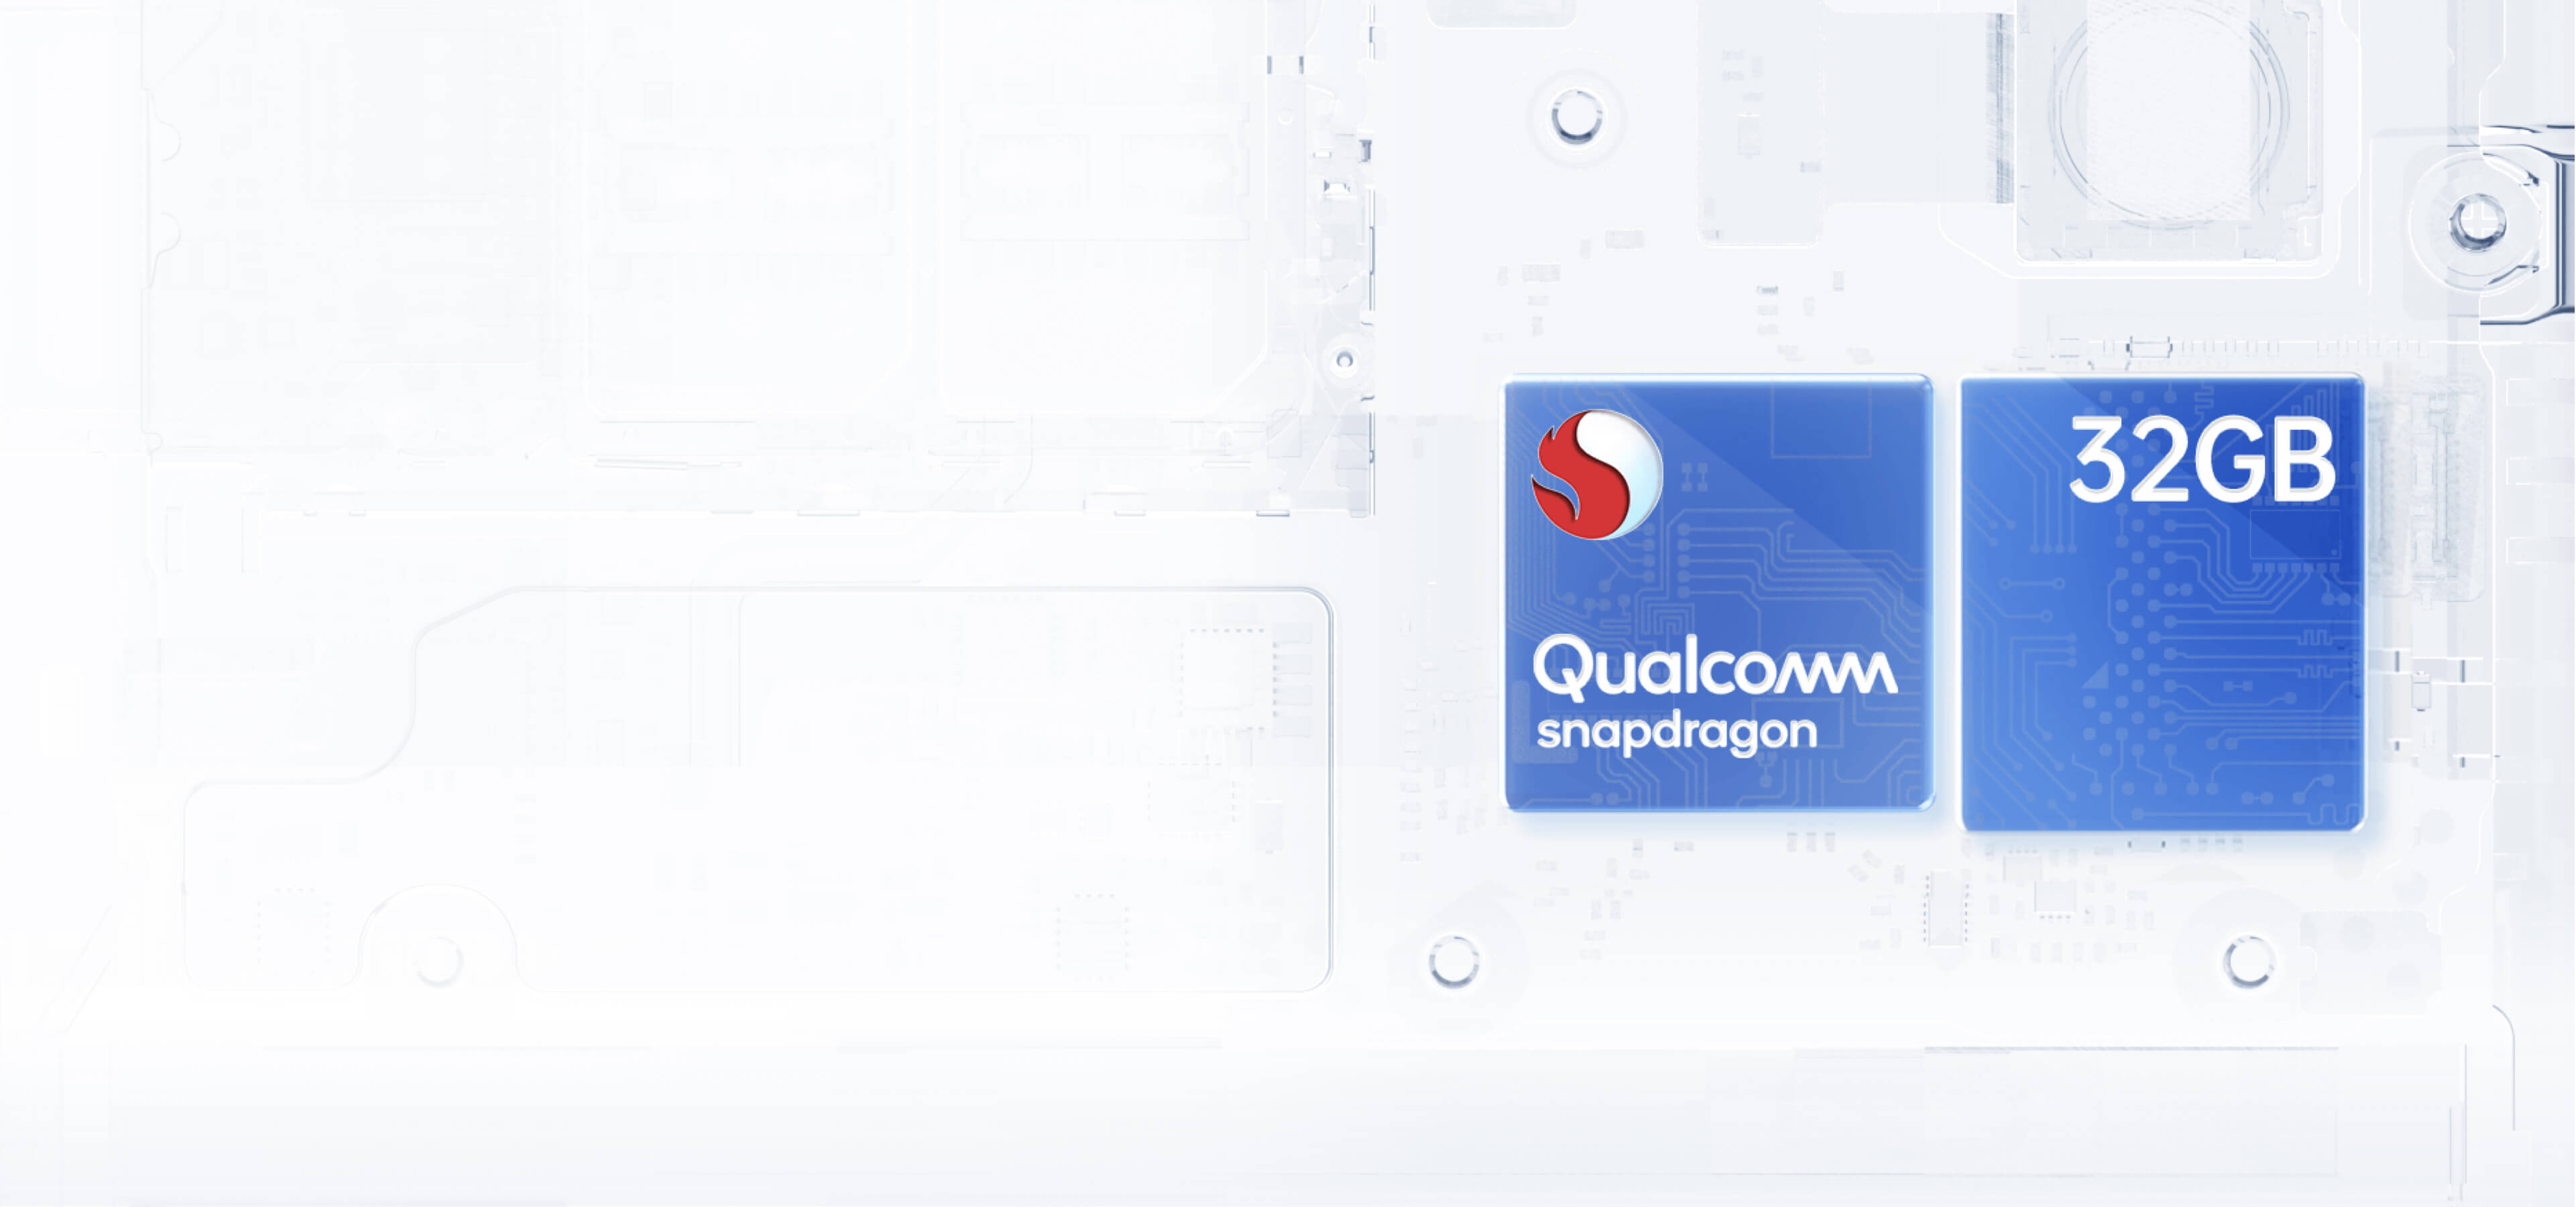 OPPO A33 Qualcomm Snapdragon